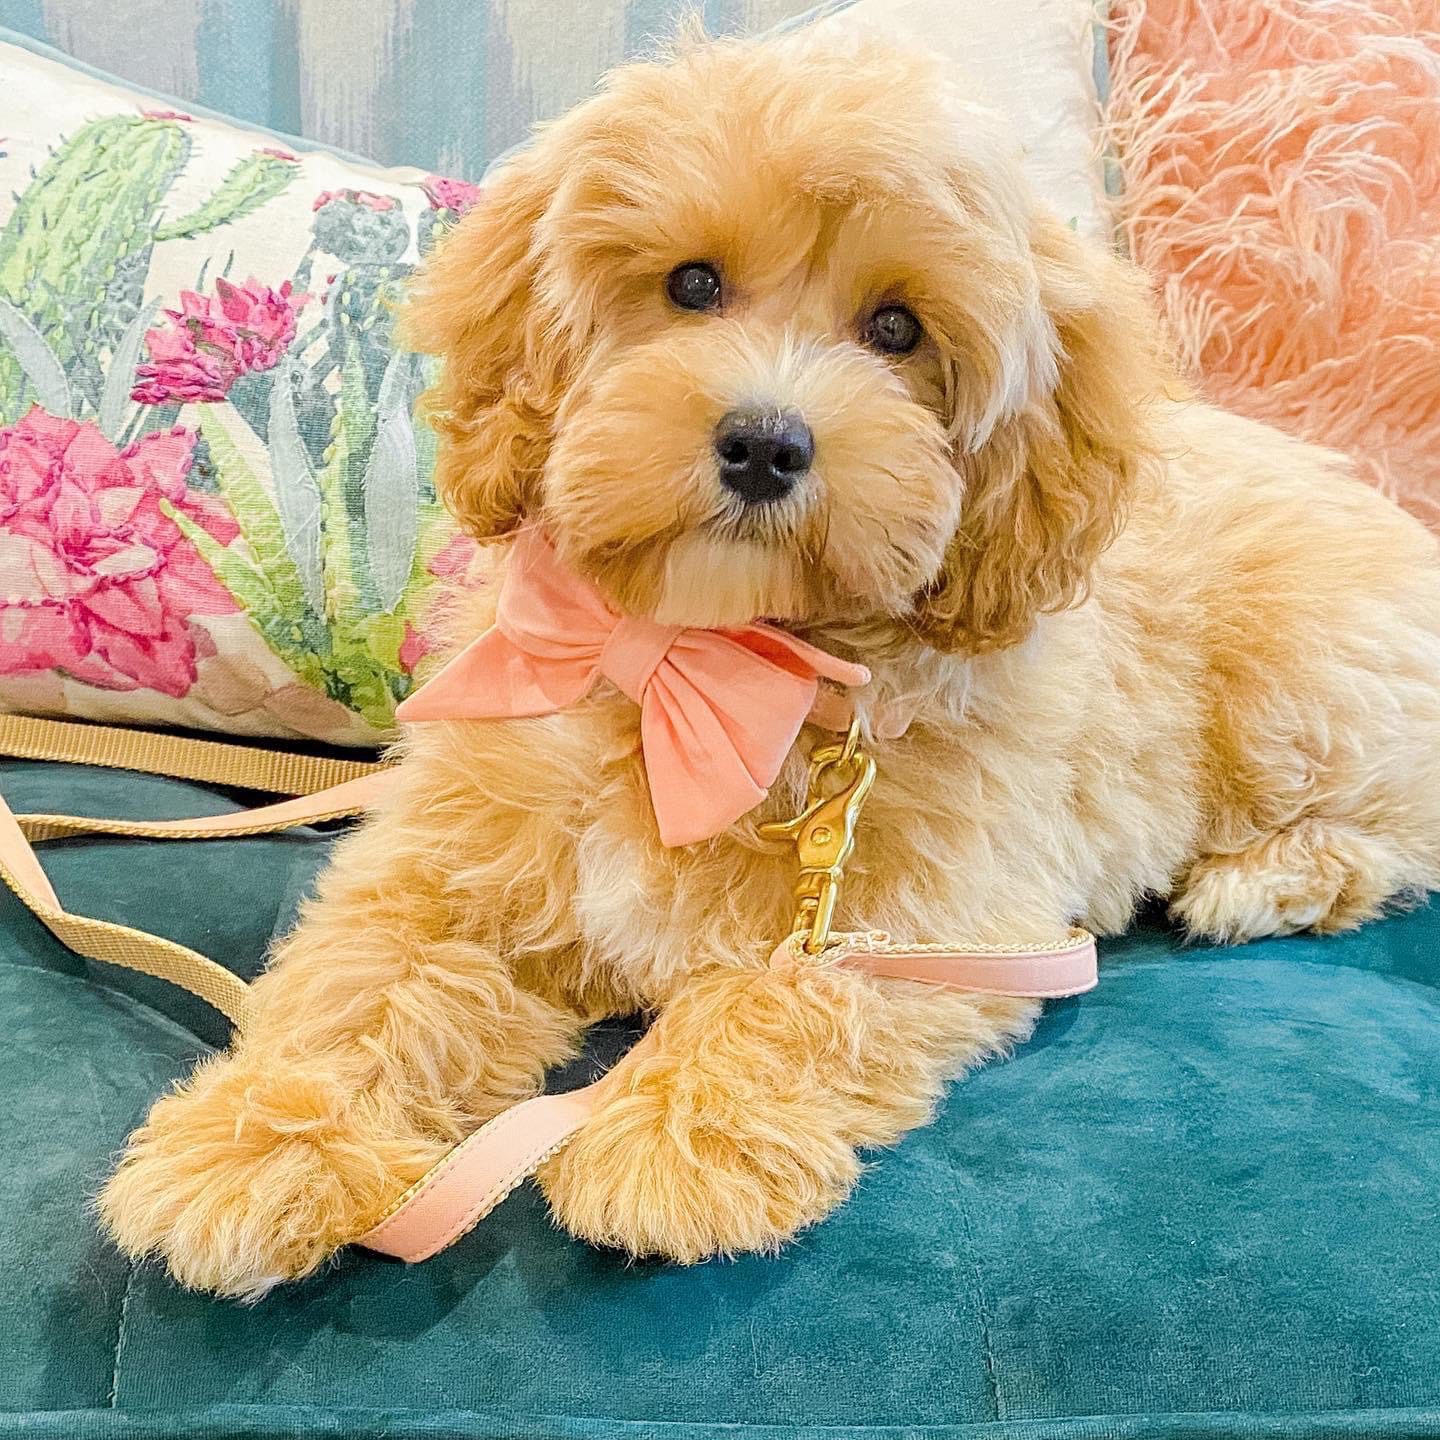 a cute teddy bear twoodle puppy on a couch with a pink bow on